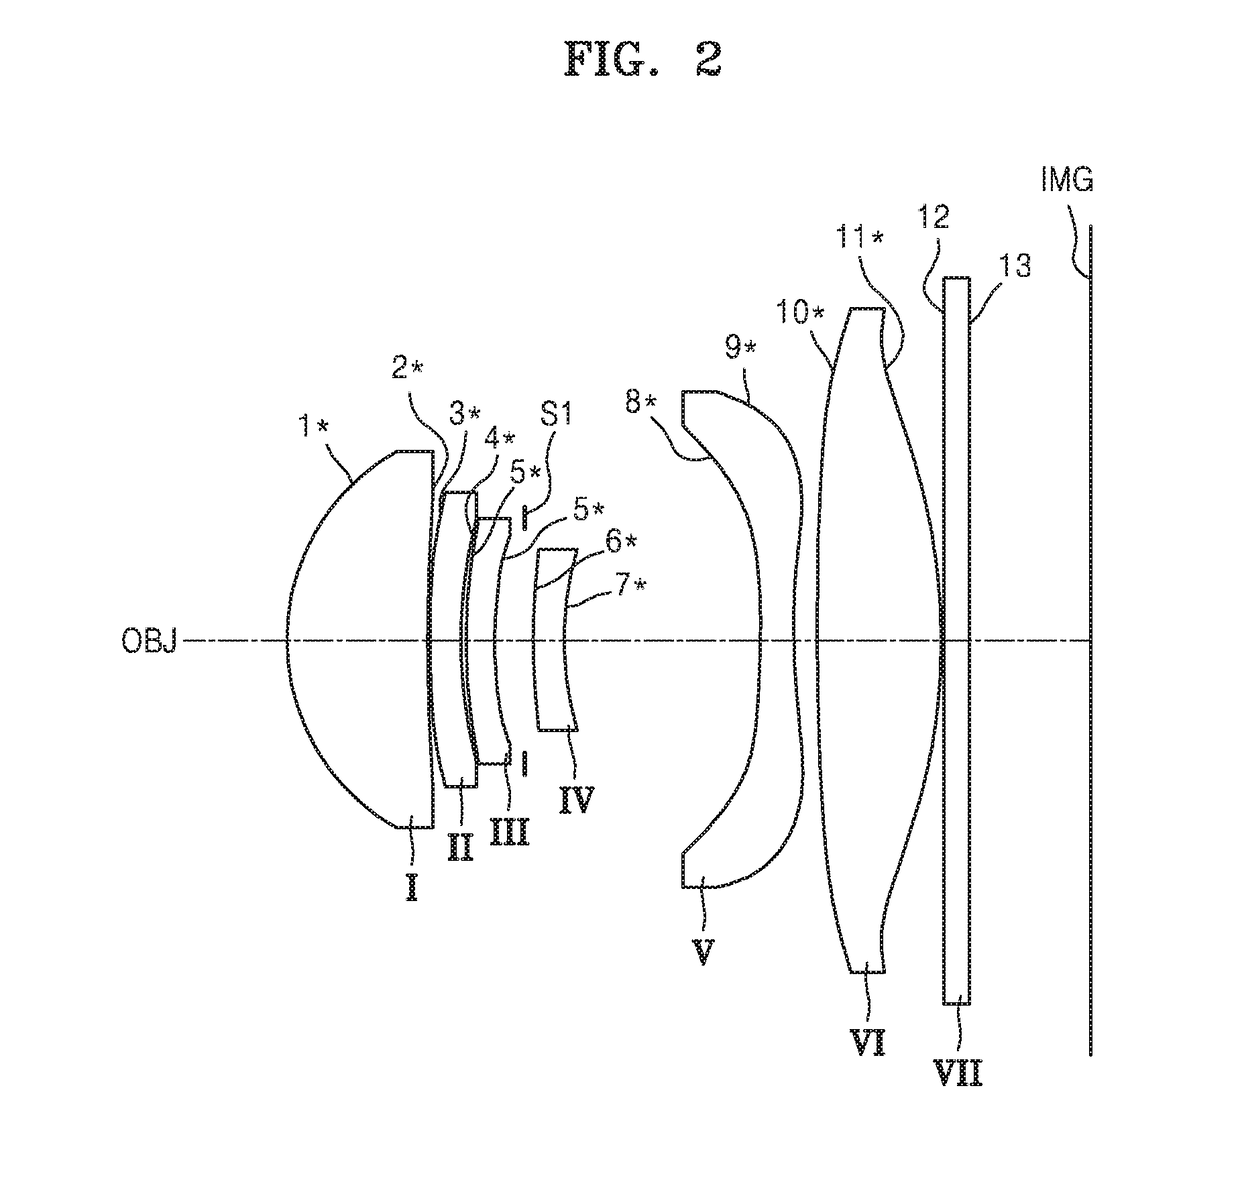 Photographic optical lens system